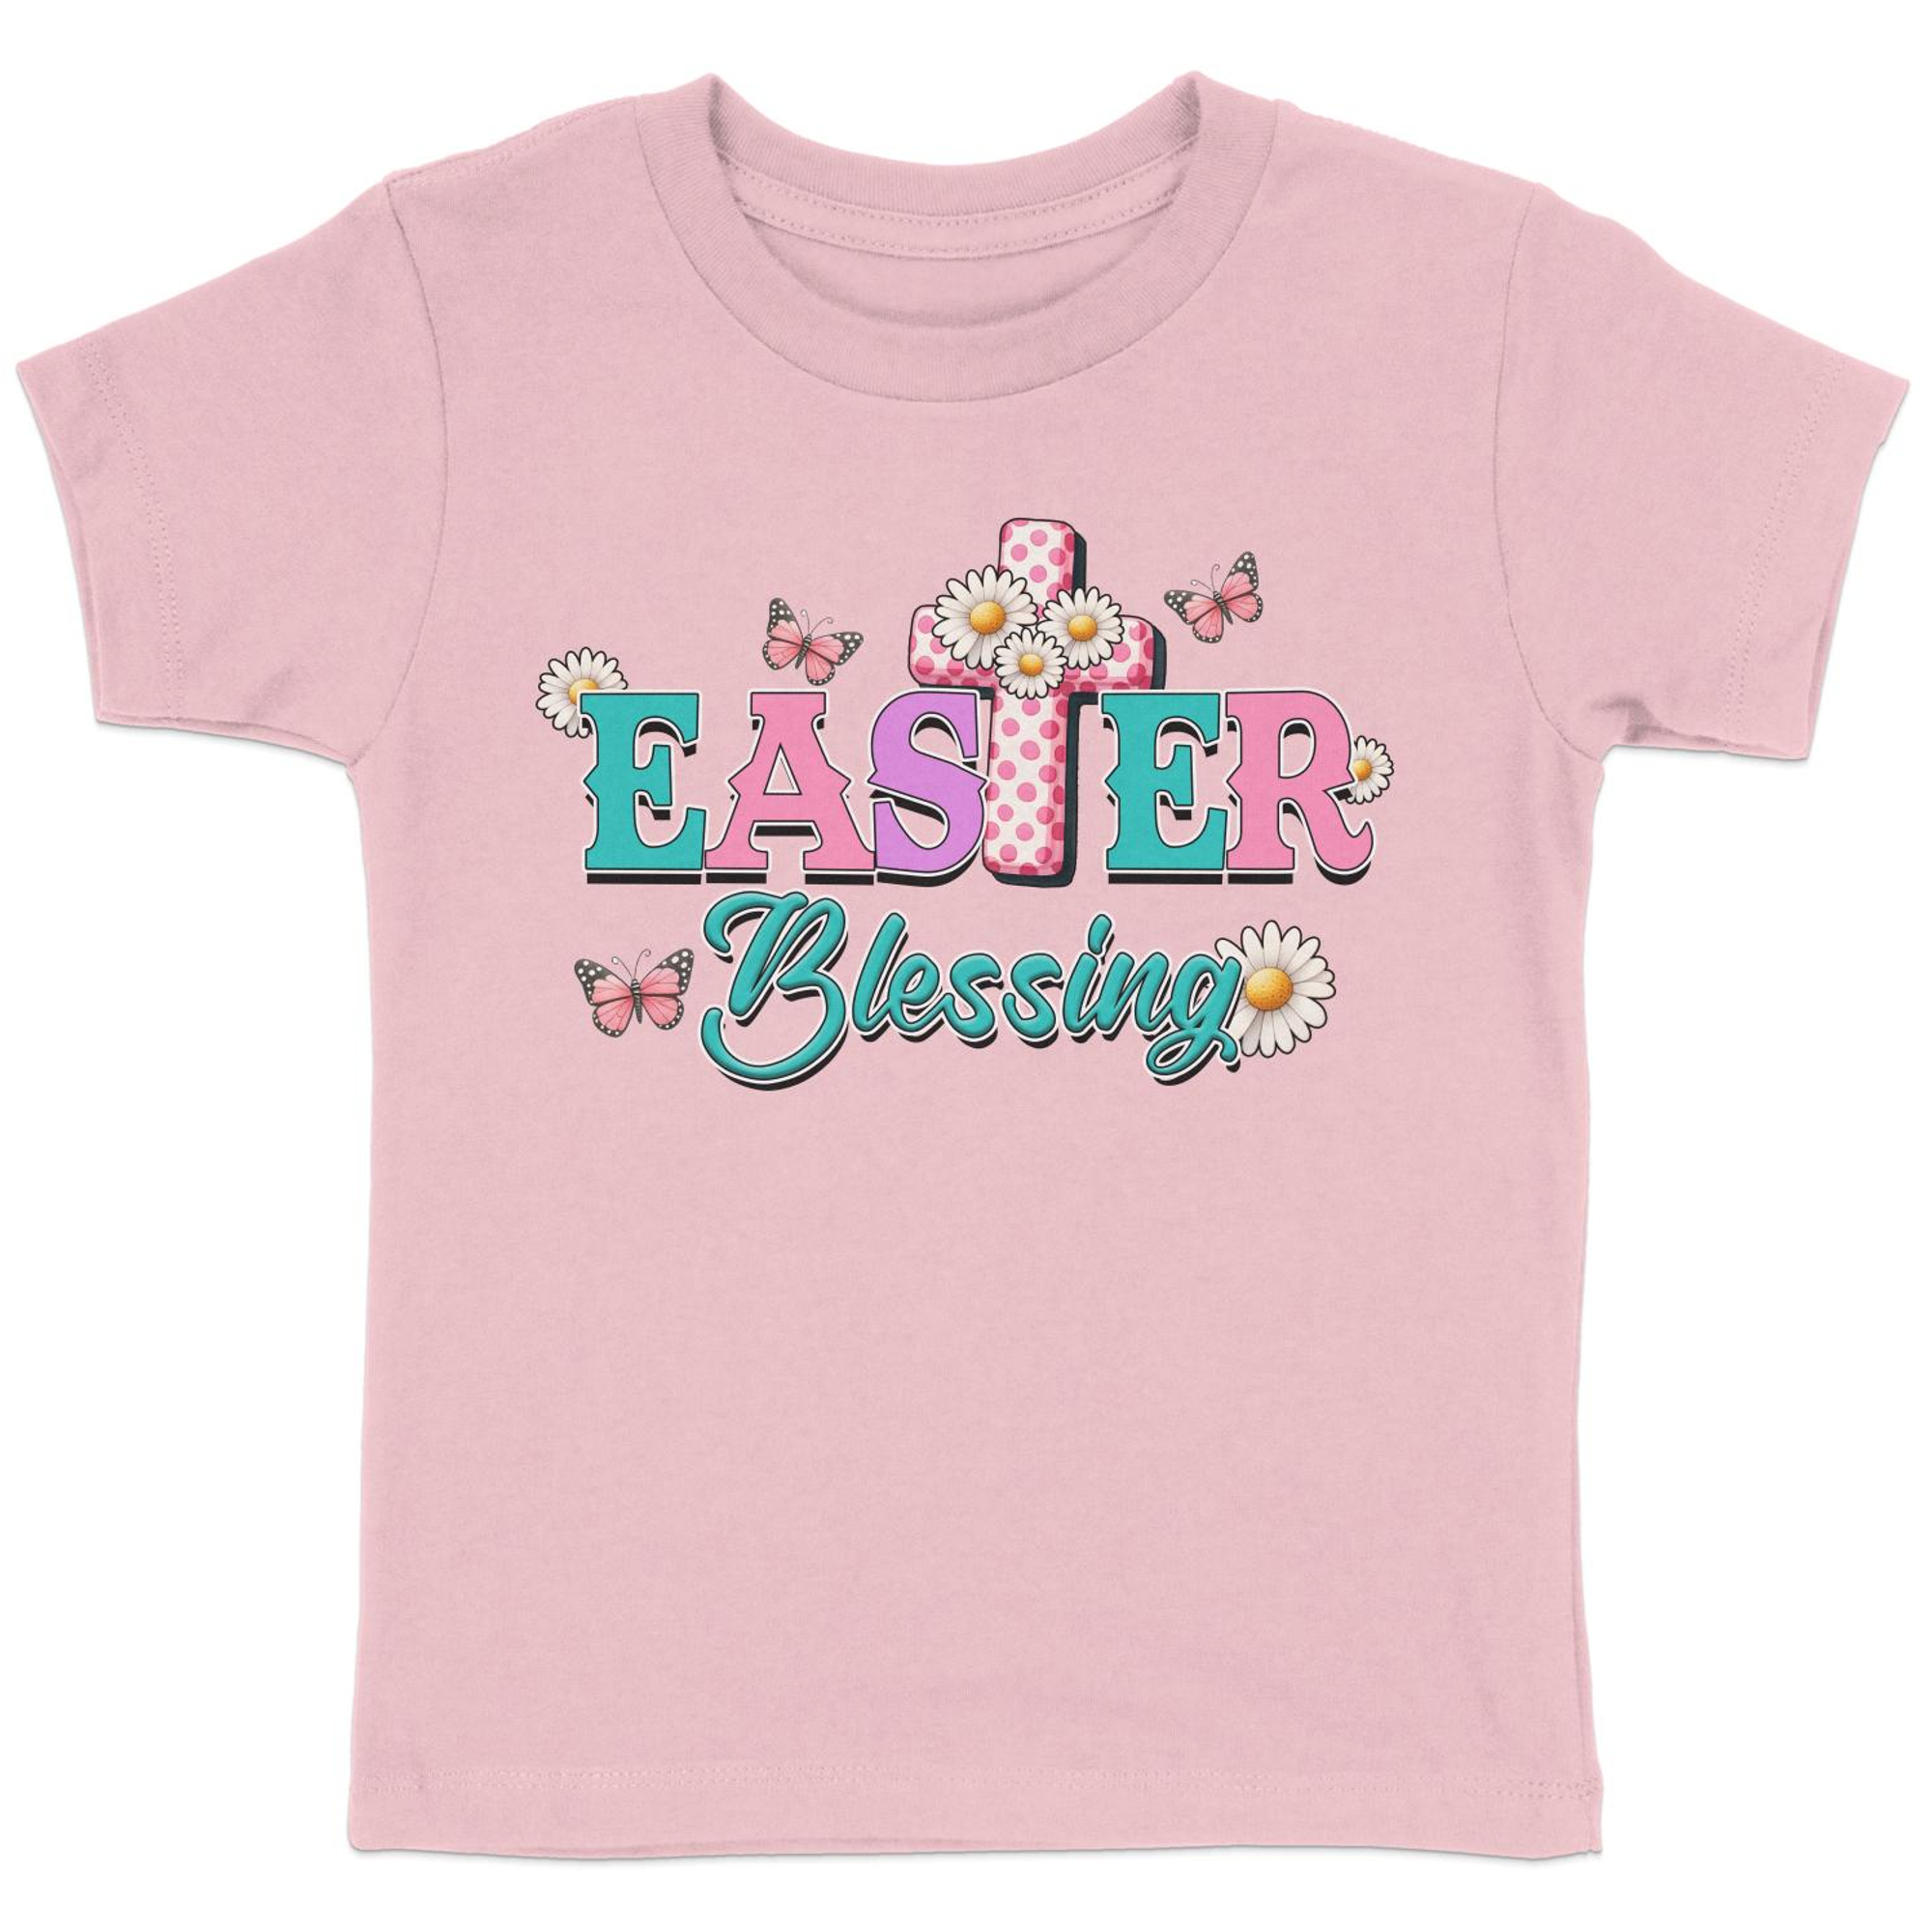 Easter Blessings Toddler Short Sleeve Tee Size: 5/6T Color: Pink Jesus Passion Apparel